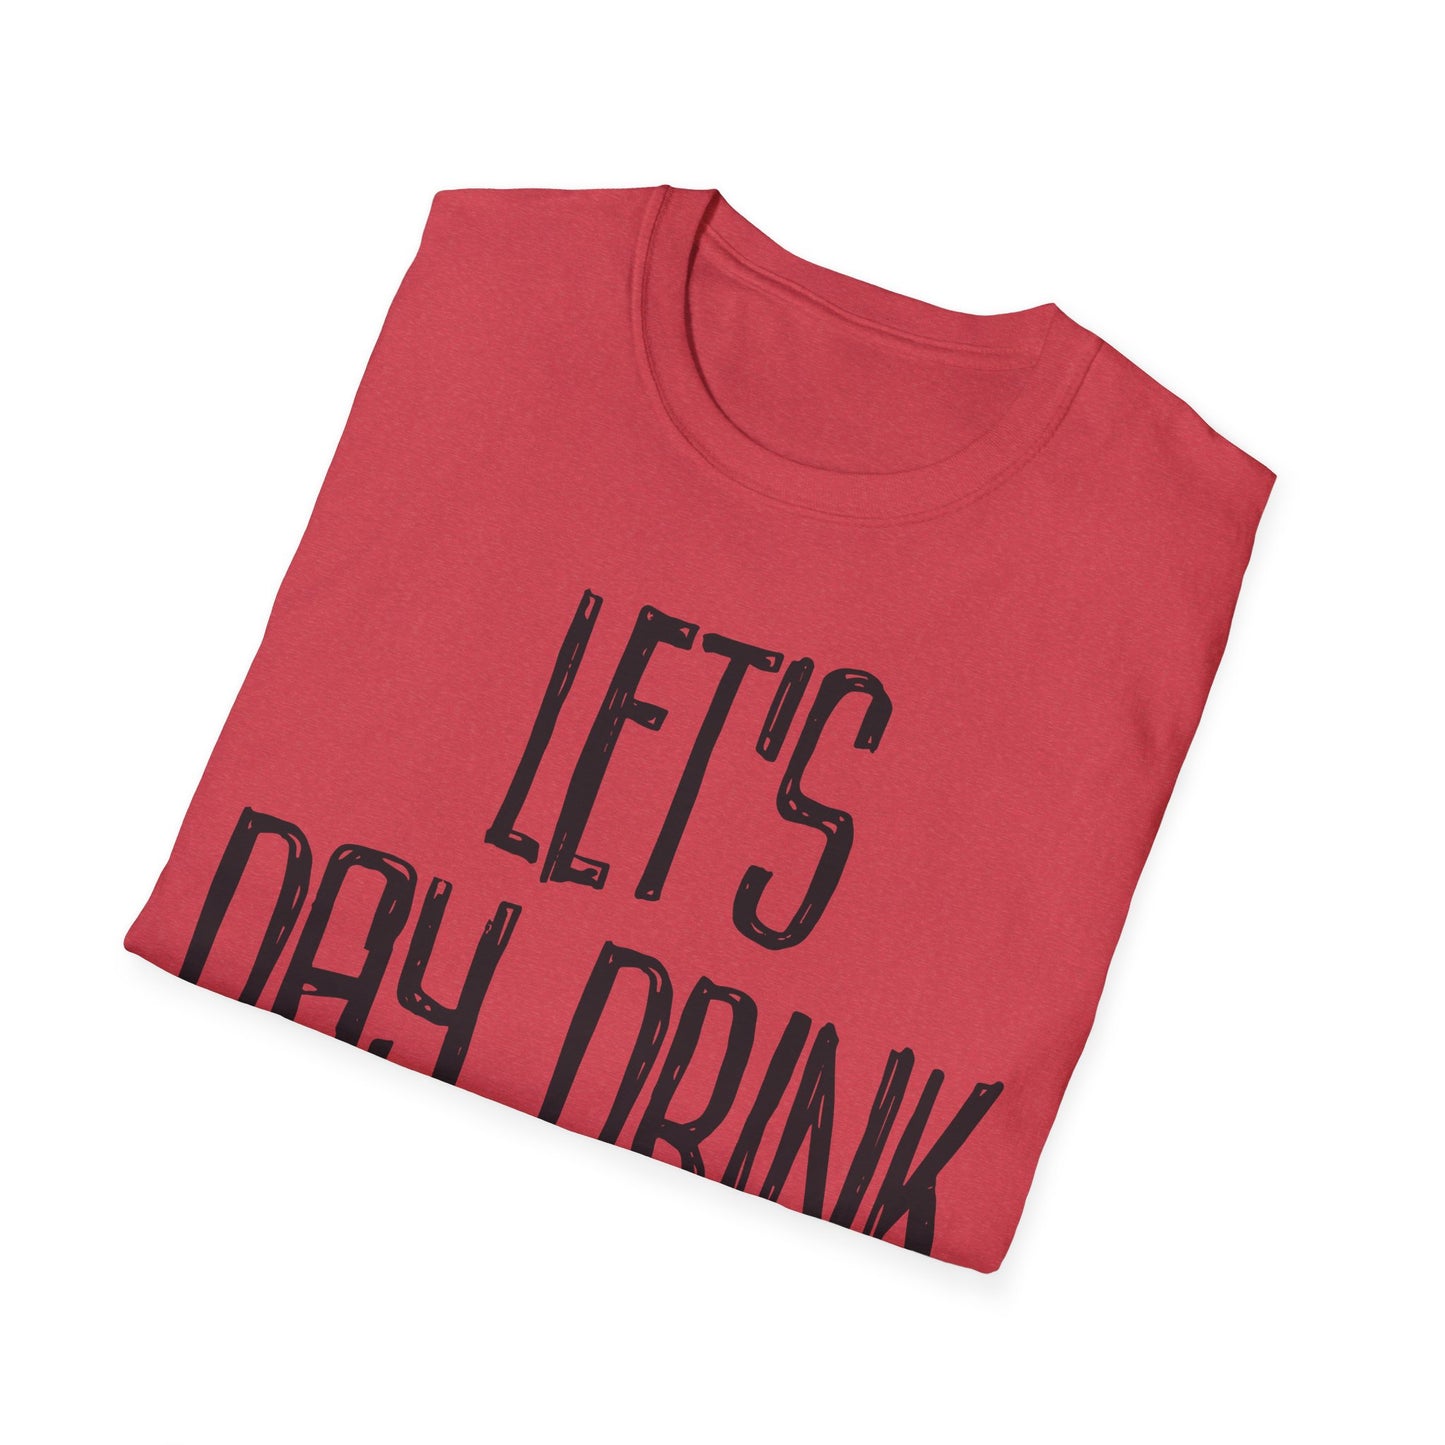 Let's Day Drink | Tee